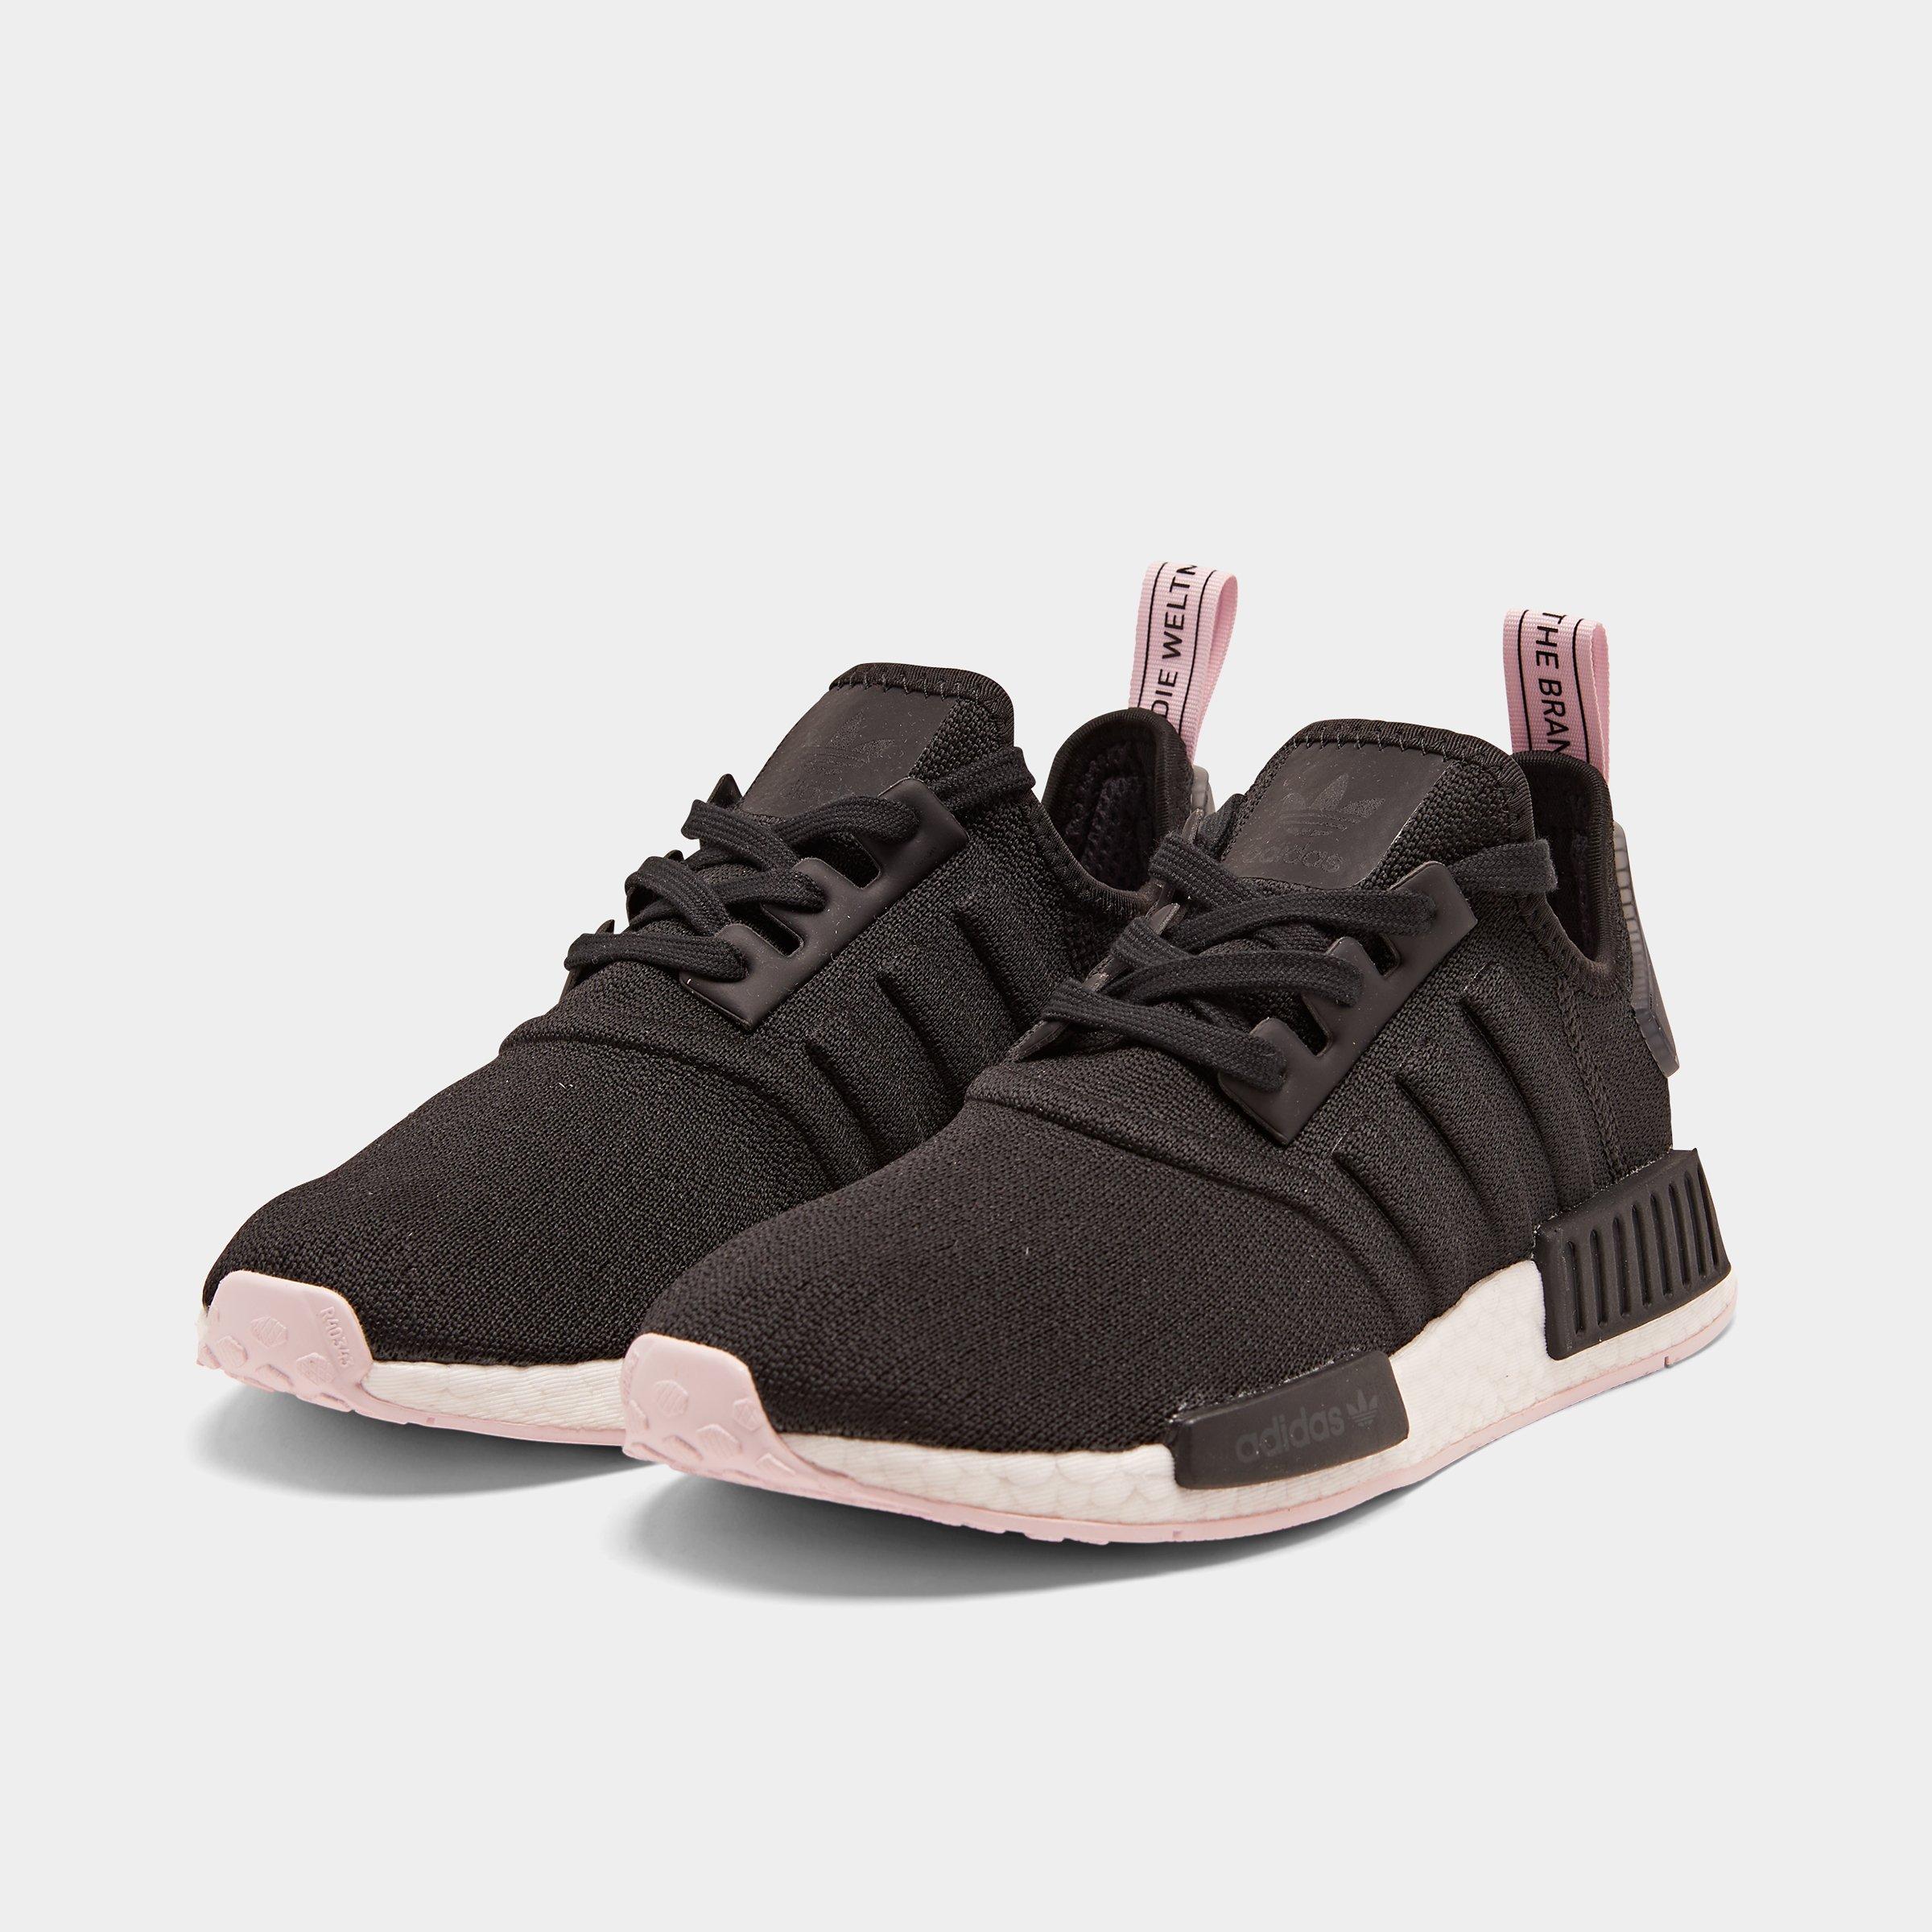 adidas nmd casual shoes